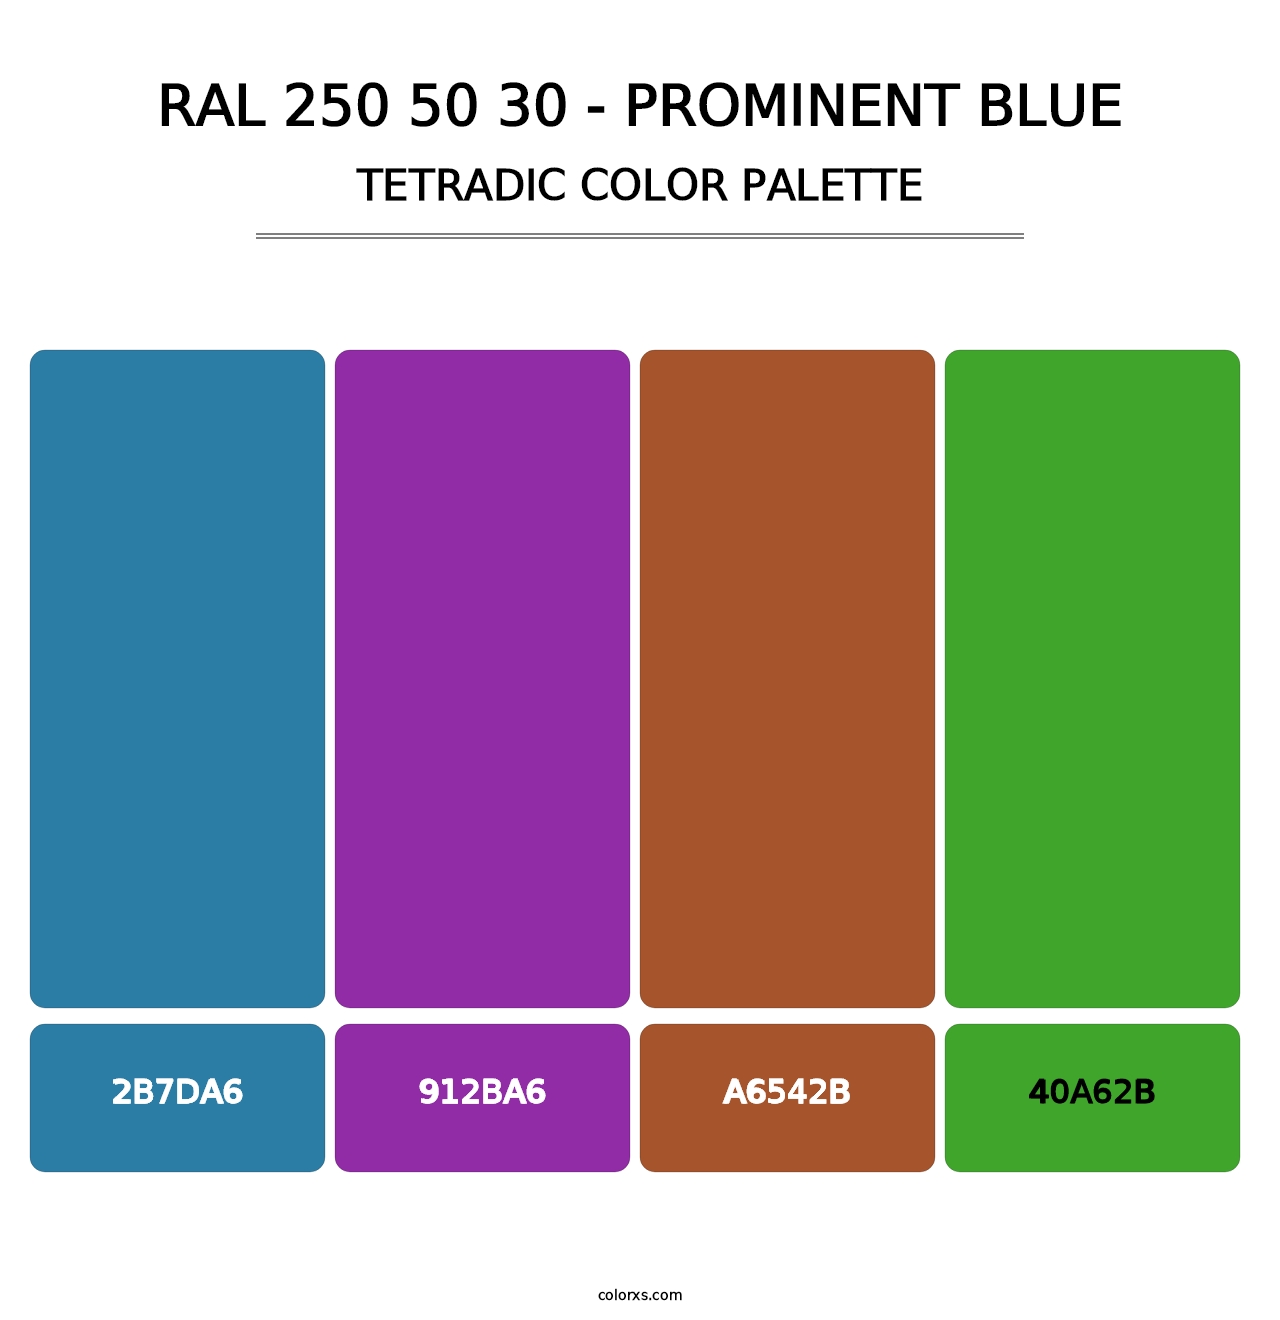 RAL 250 50 30 - Prominent Blue - Tetradic Color Palette